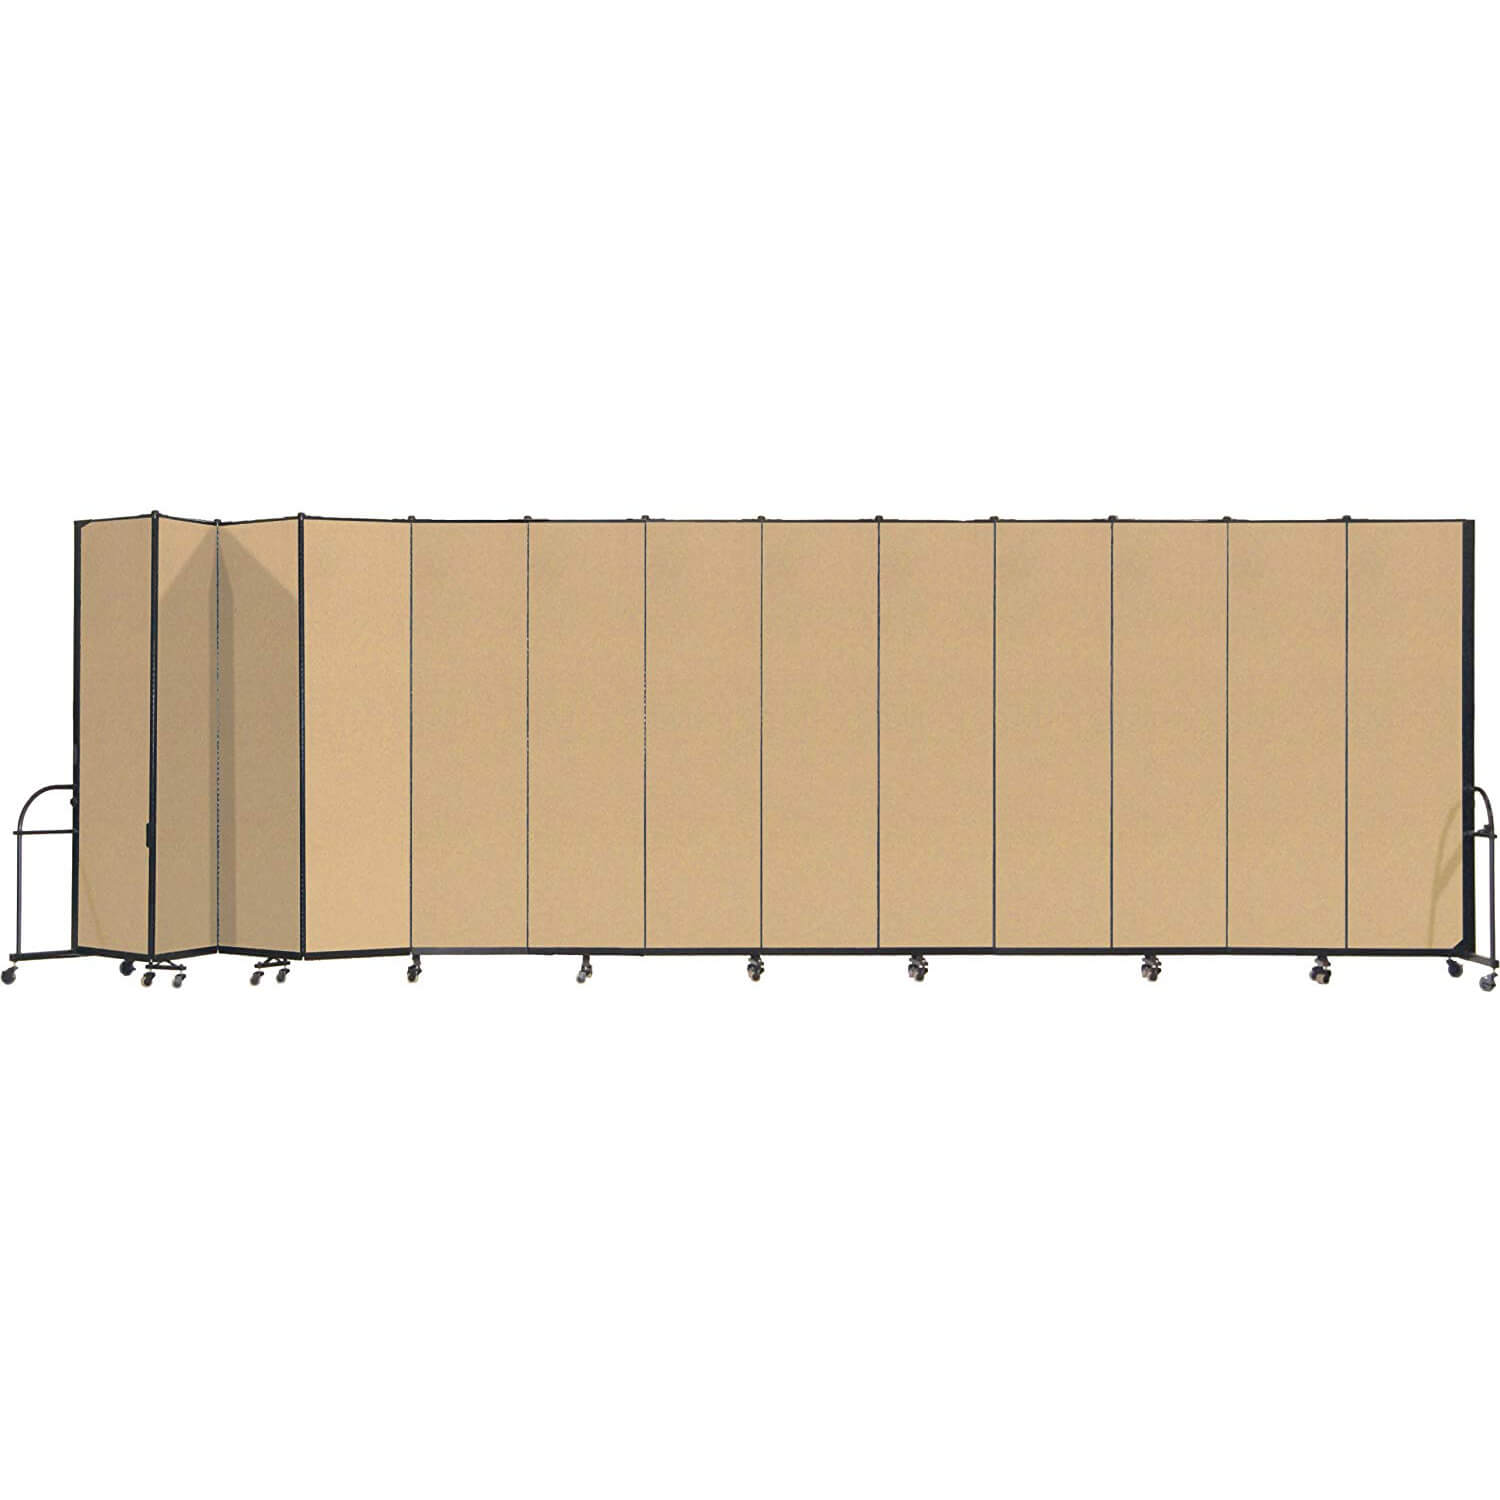 Portable room dividers screen panel dividers